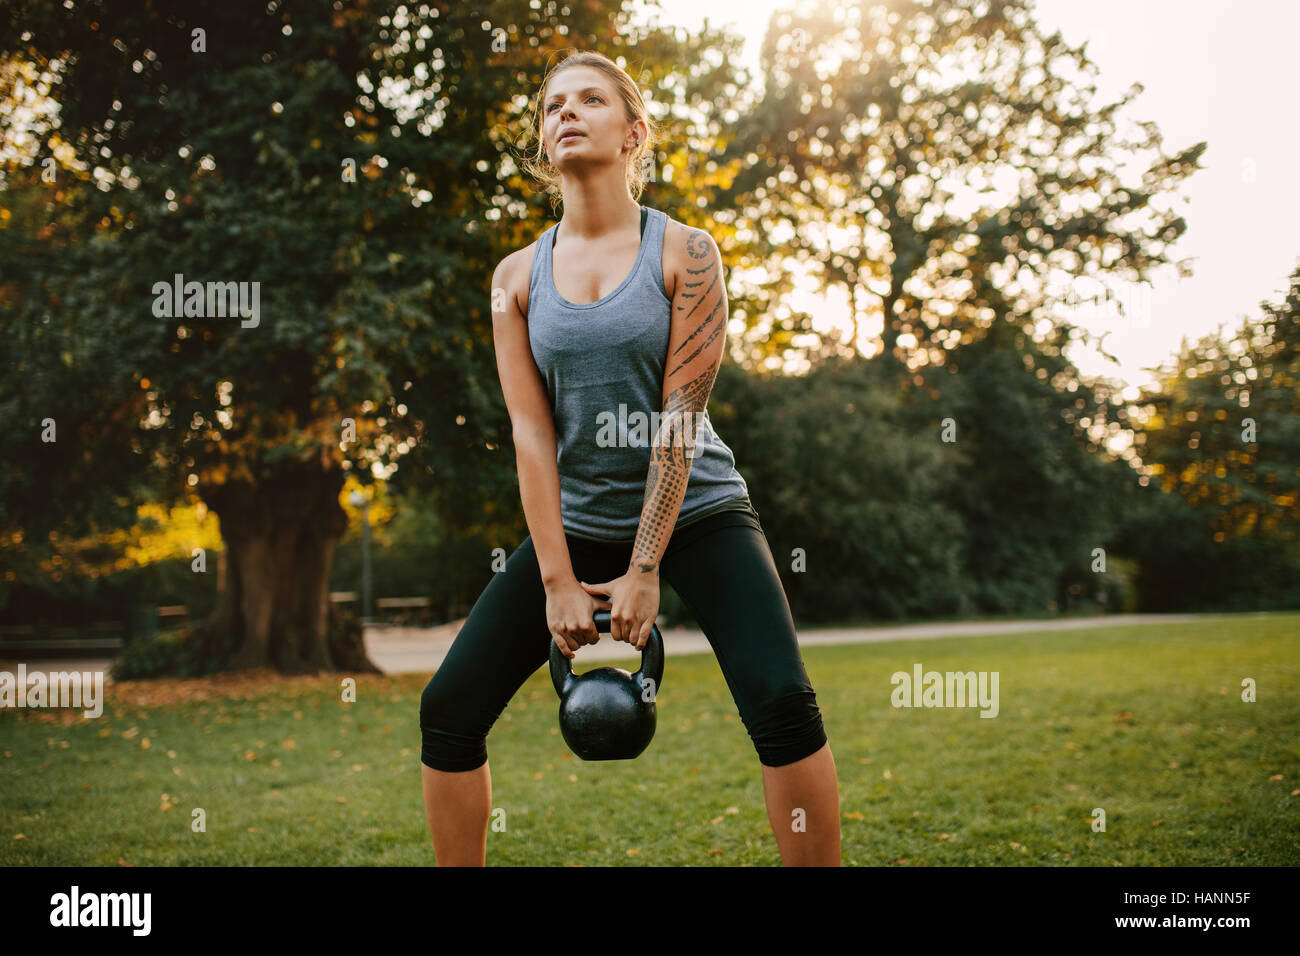 Portrait of strong young woman exercising with kettlebell weights in the park.  Fit and muscular woman training at city park in morning. Stock Photo